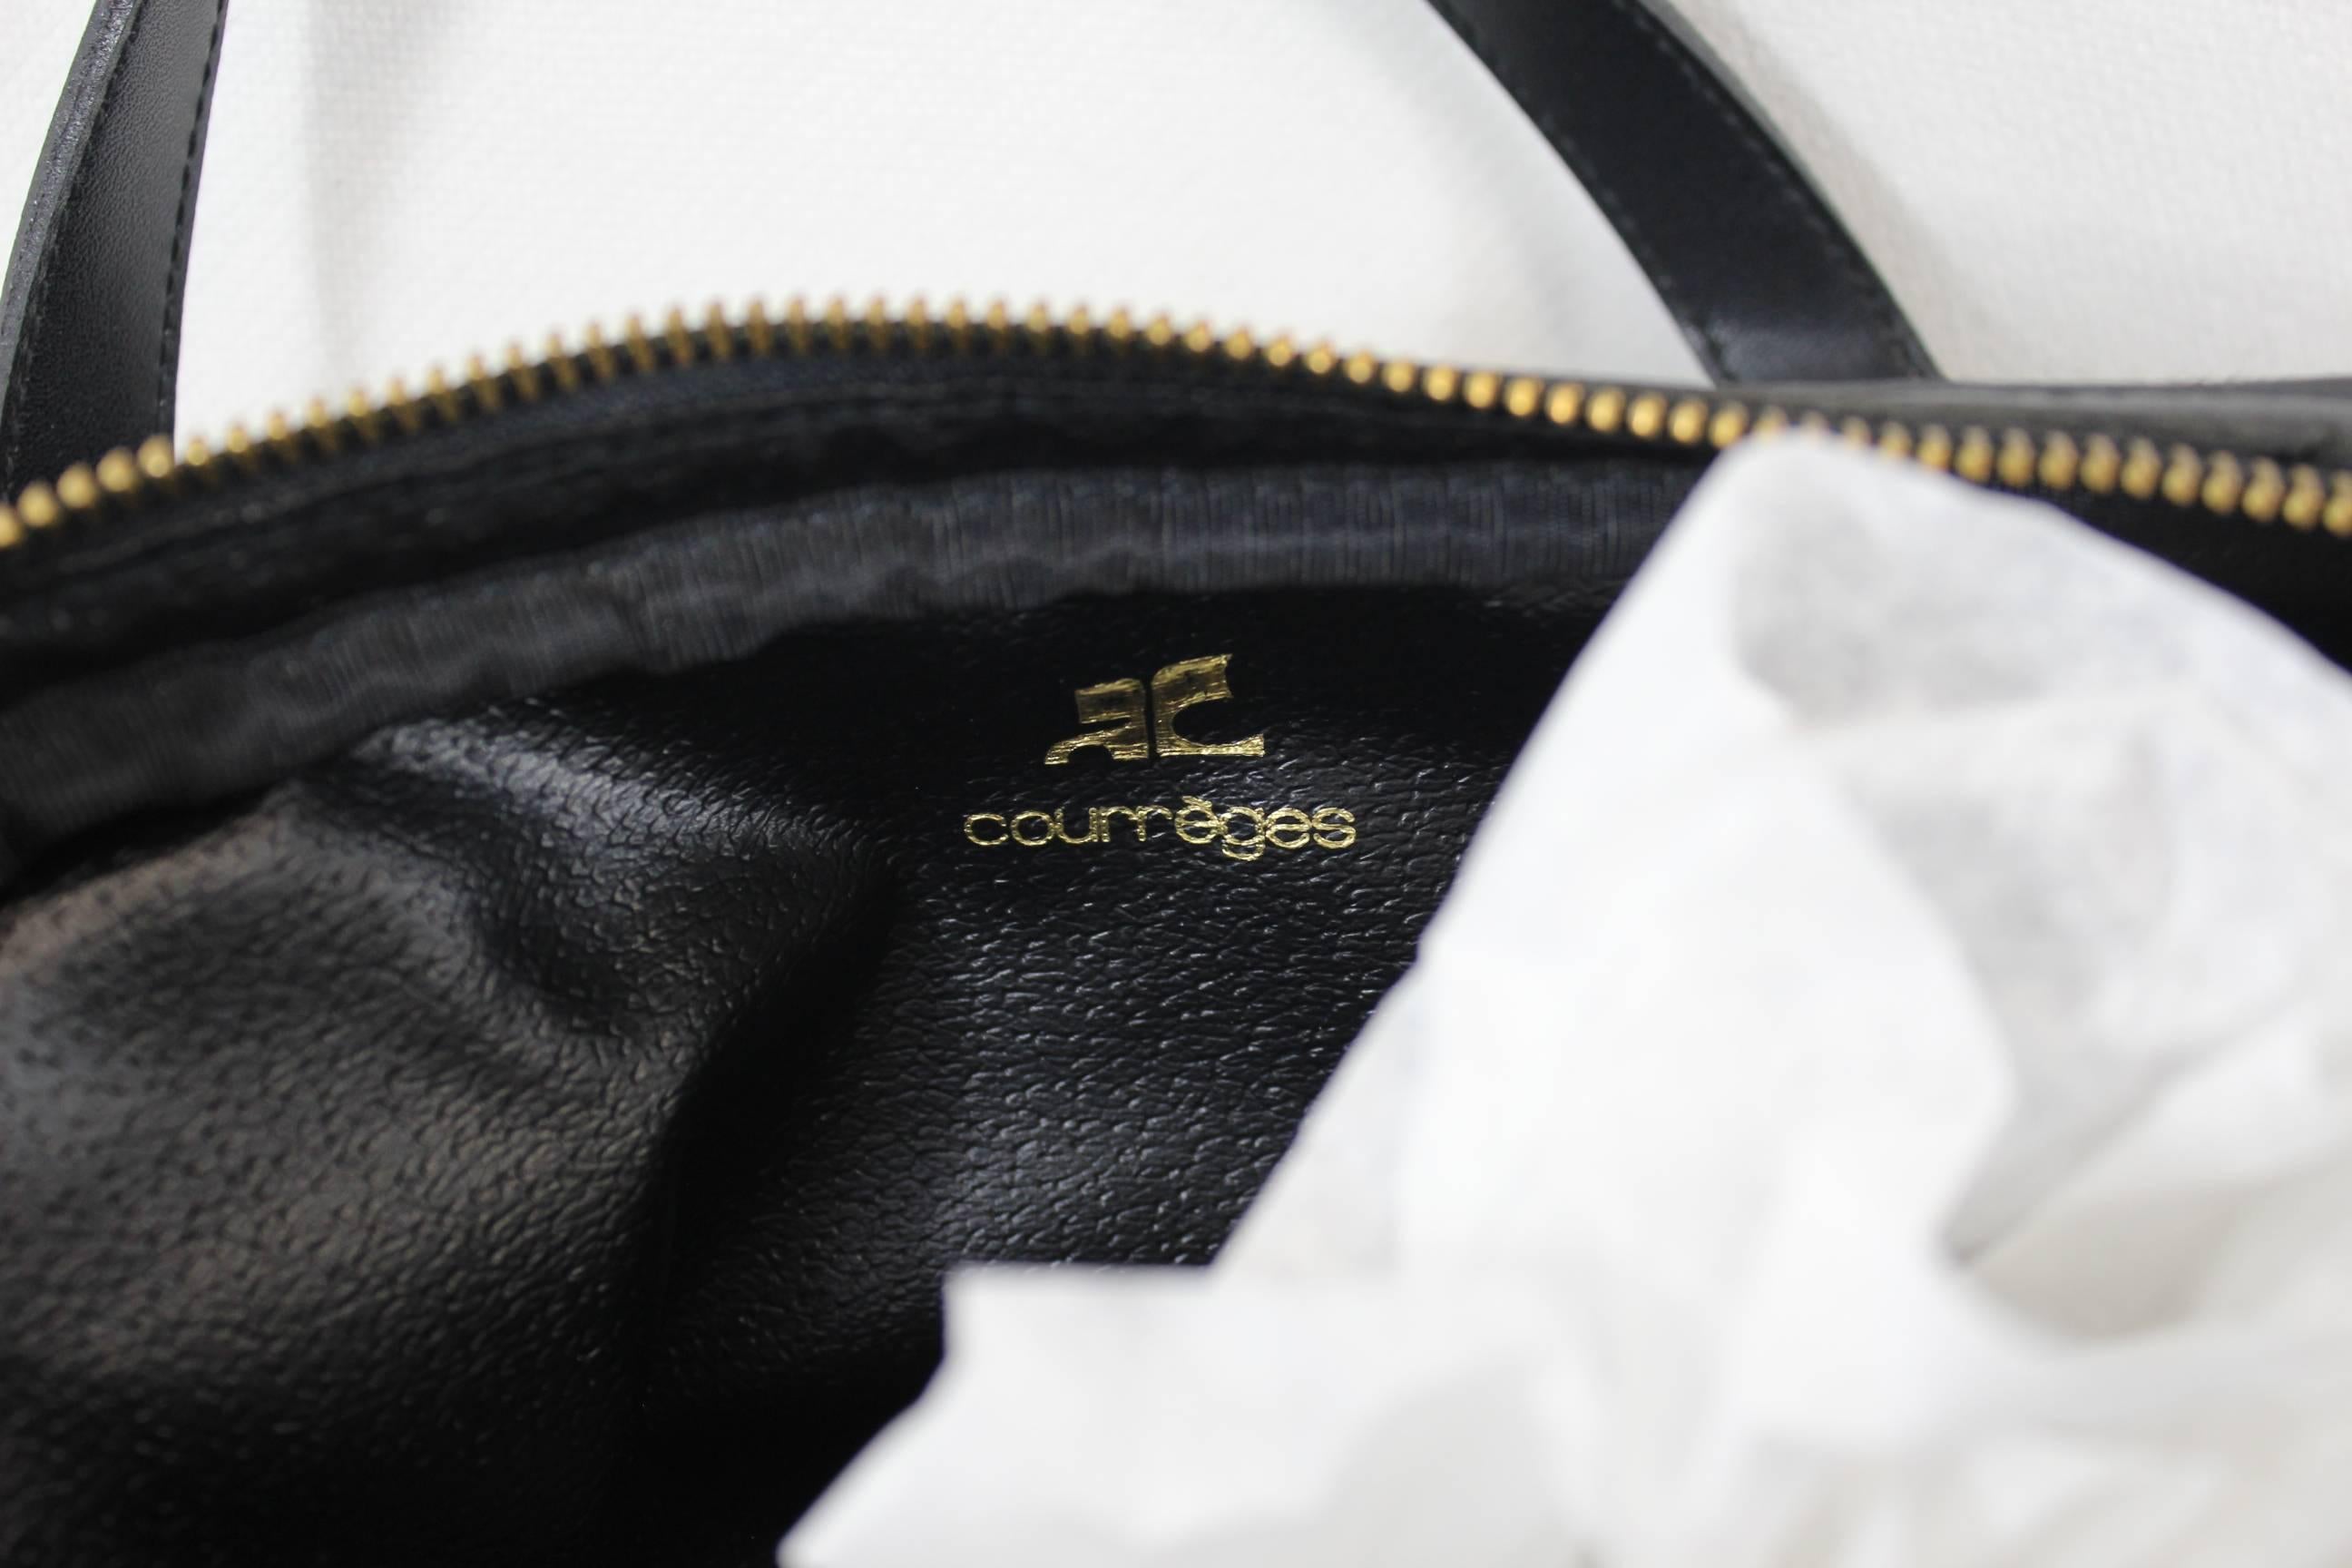 Vintage french designeer Courreges Boston bag in black leather and cordoroy.
Excellent condition, never used.
One zipped pocket
Size: 28x20
Possibility to add an strap to wear it crossbody (strap not sold with th bag)